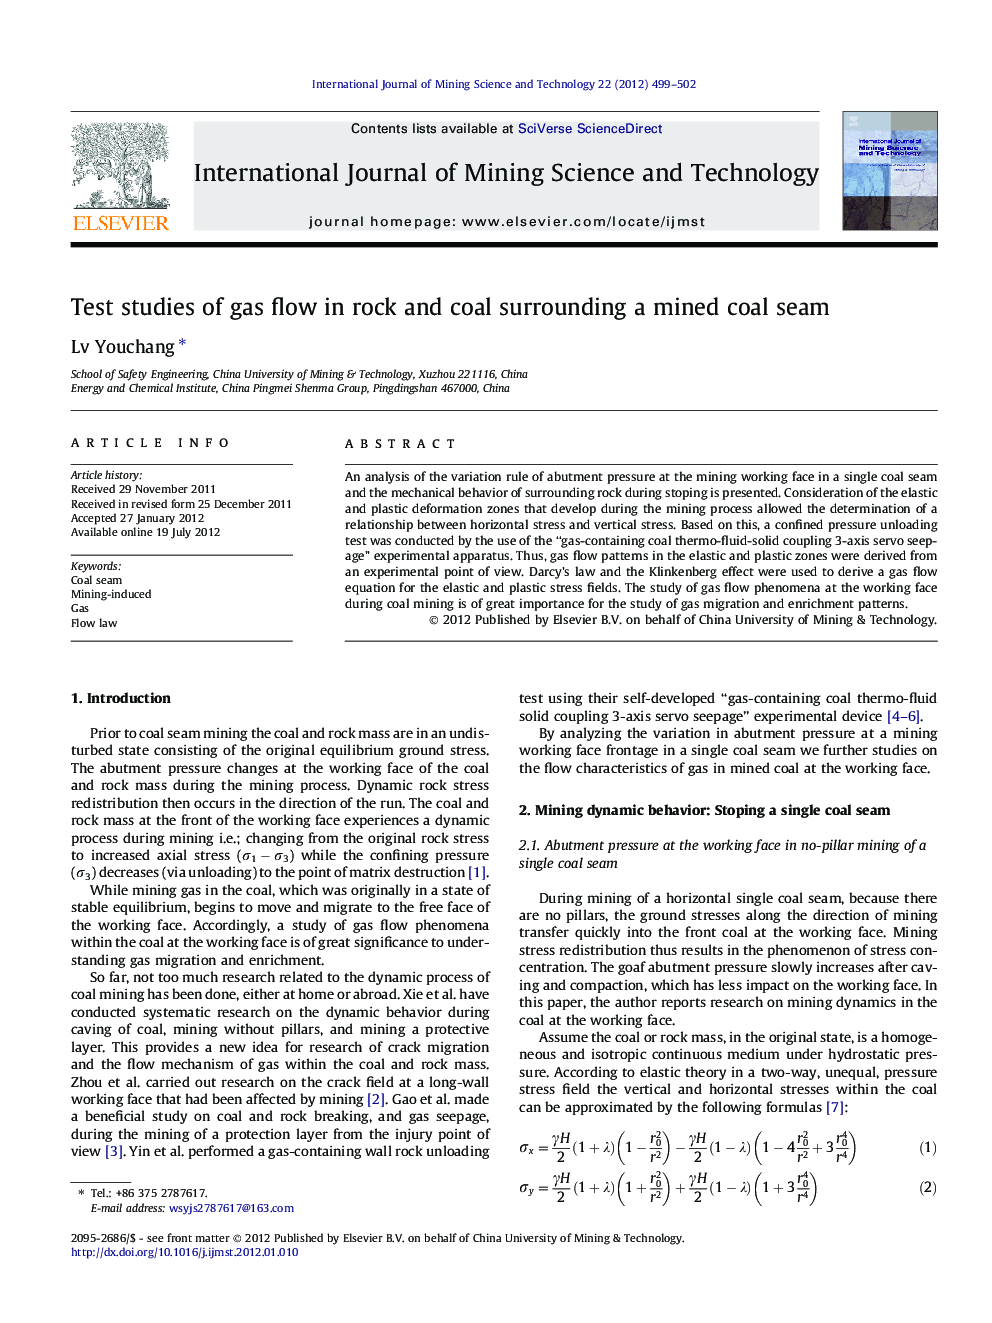 Test studies of gas flow in rock and coal surrounding a mined coal seam